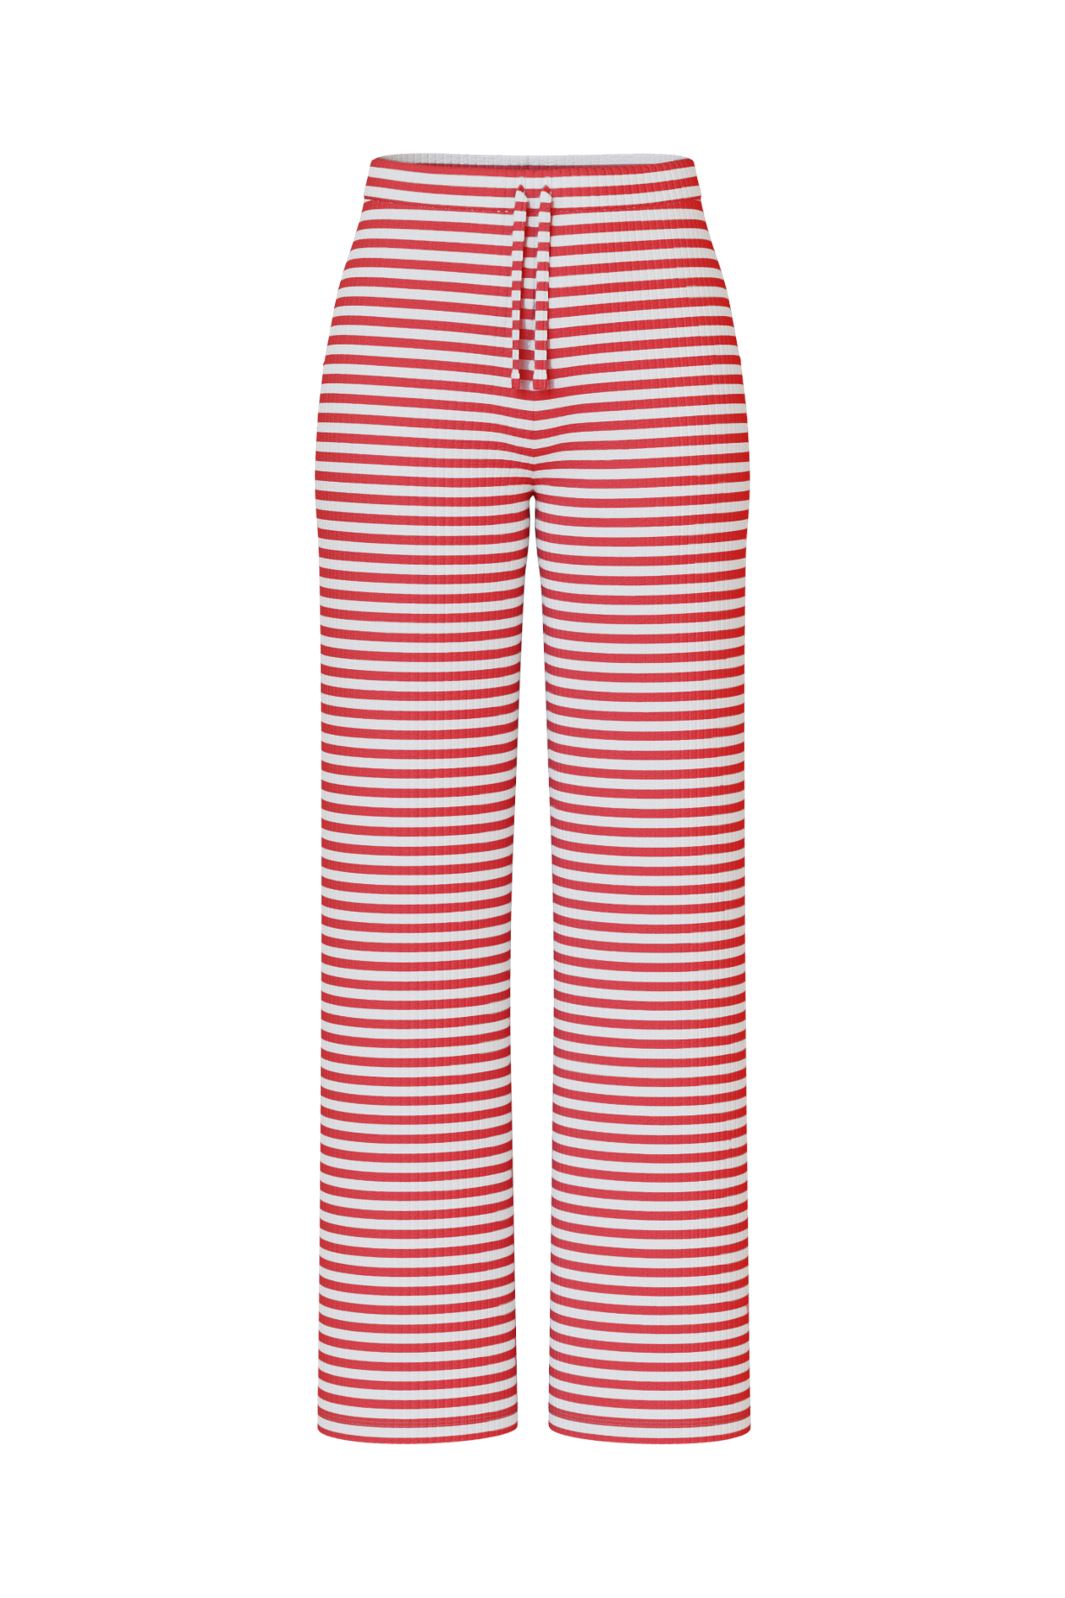 Pieces - Pclaya Wide Pants - 4700193 Bright White High Risk Red